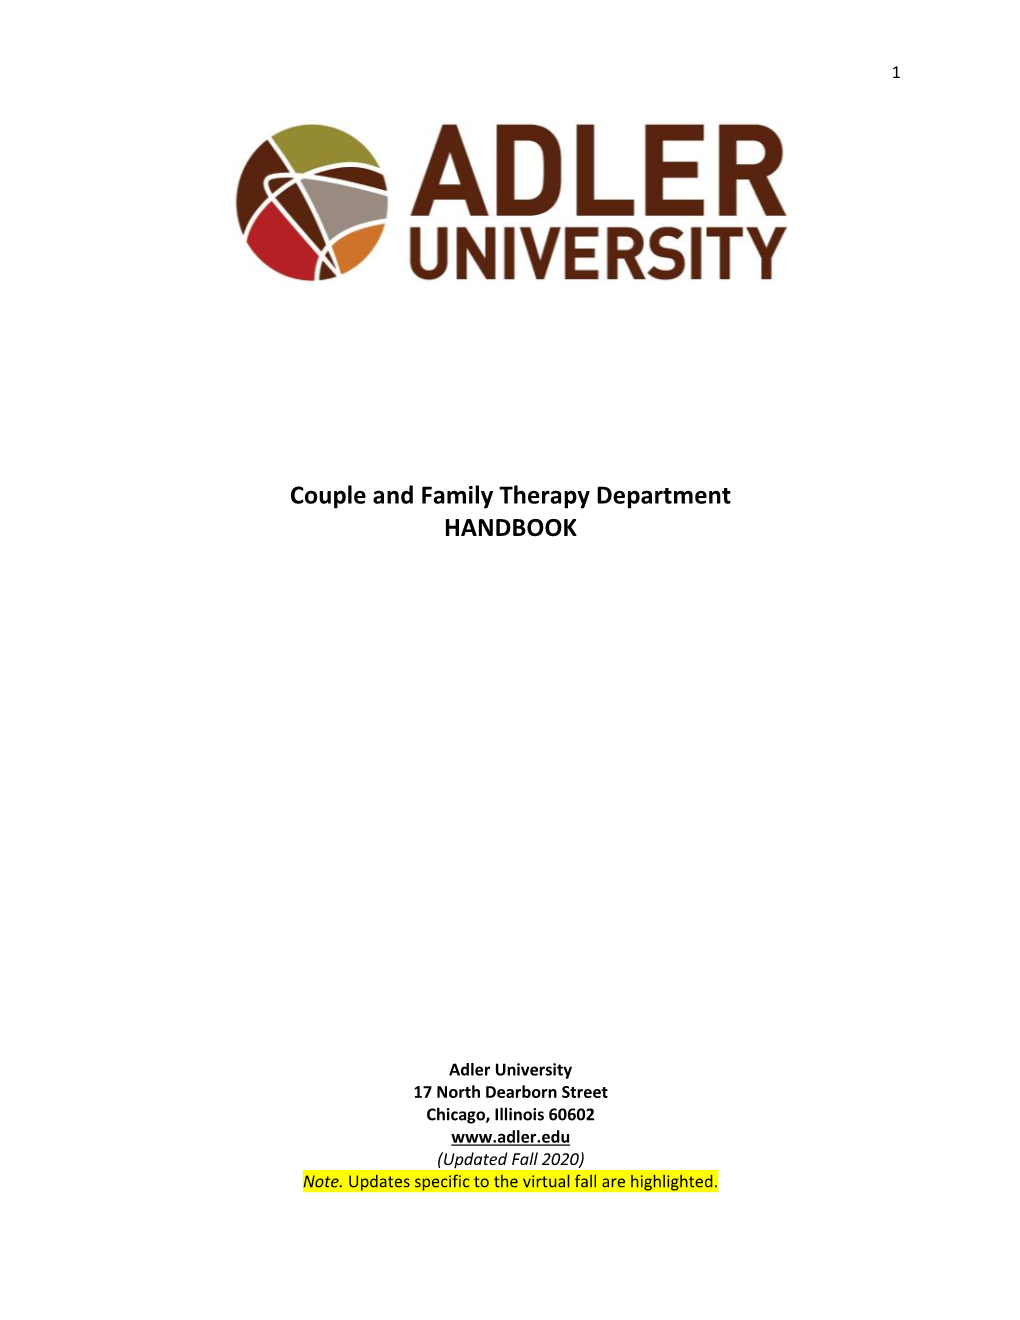 Couple and Family Therapy Department HANDBOOK